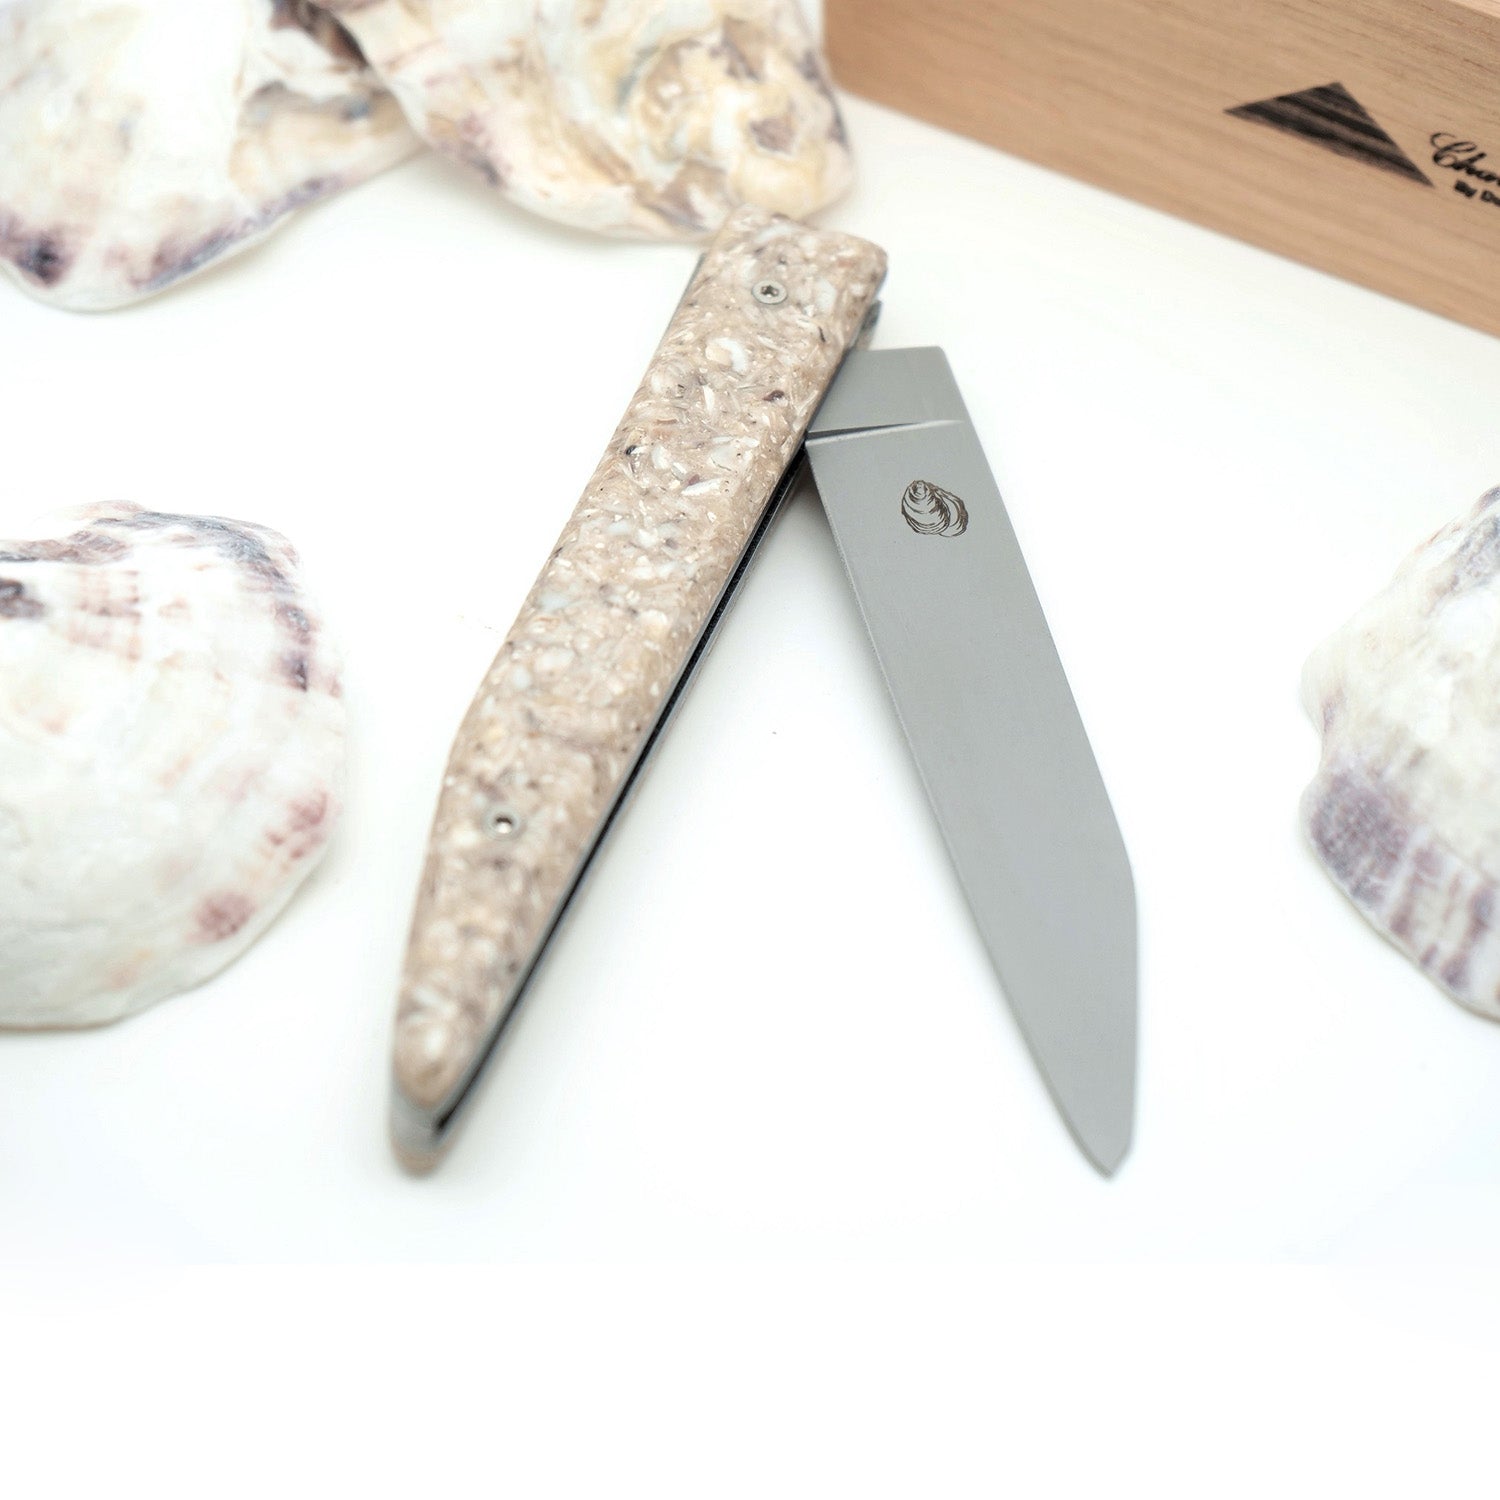 Knife handle made from recycled oyster shells